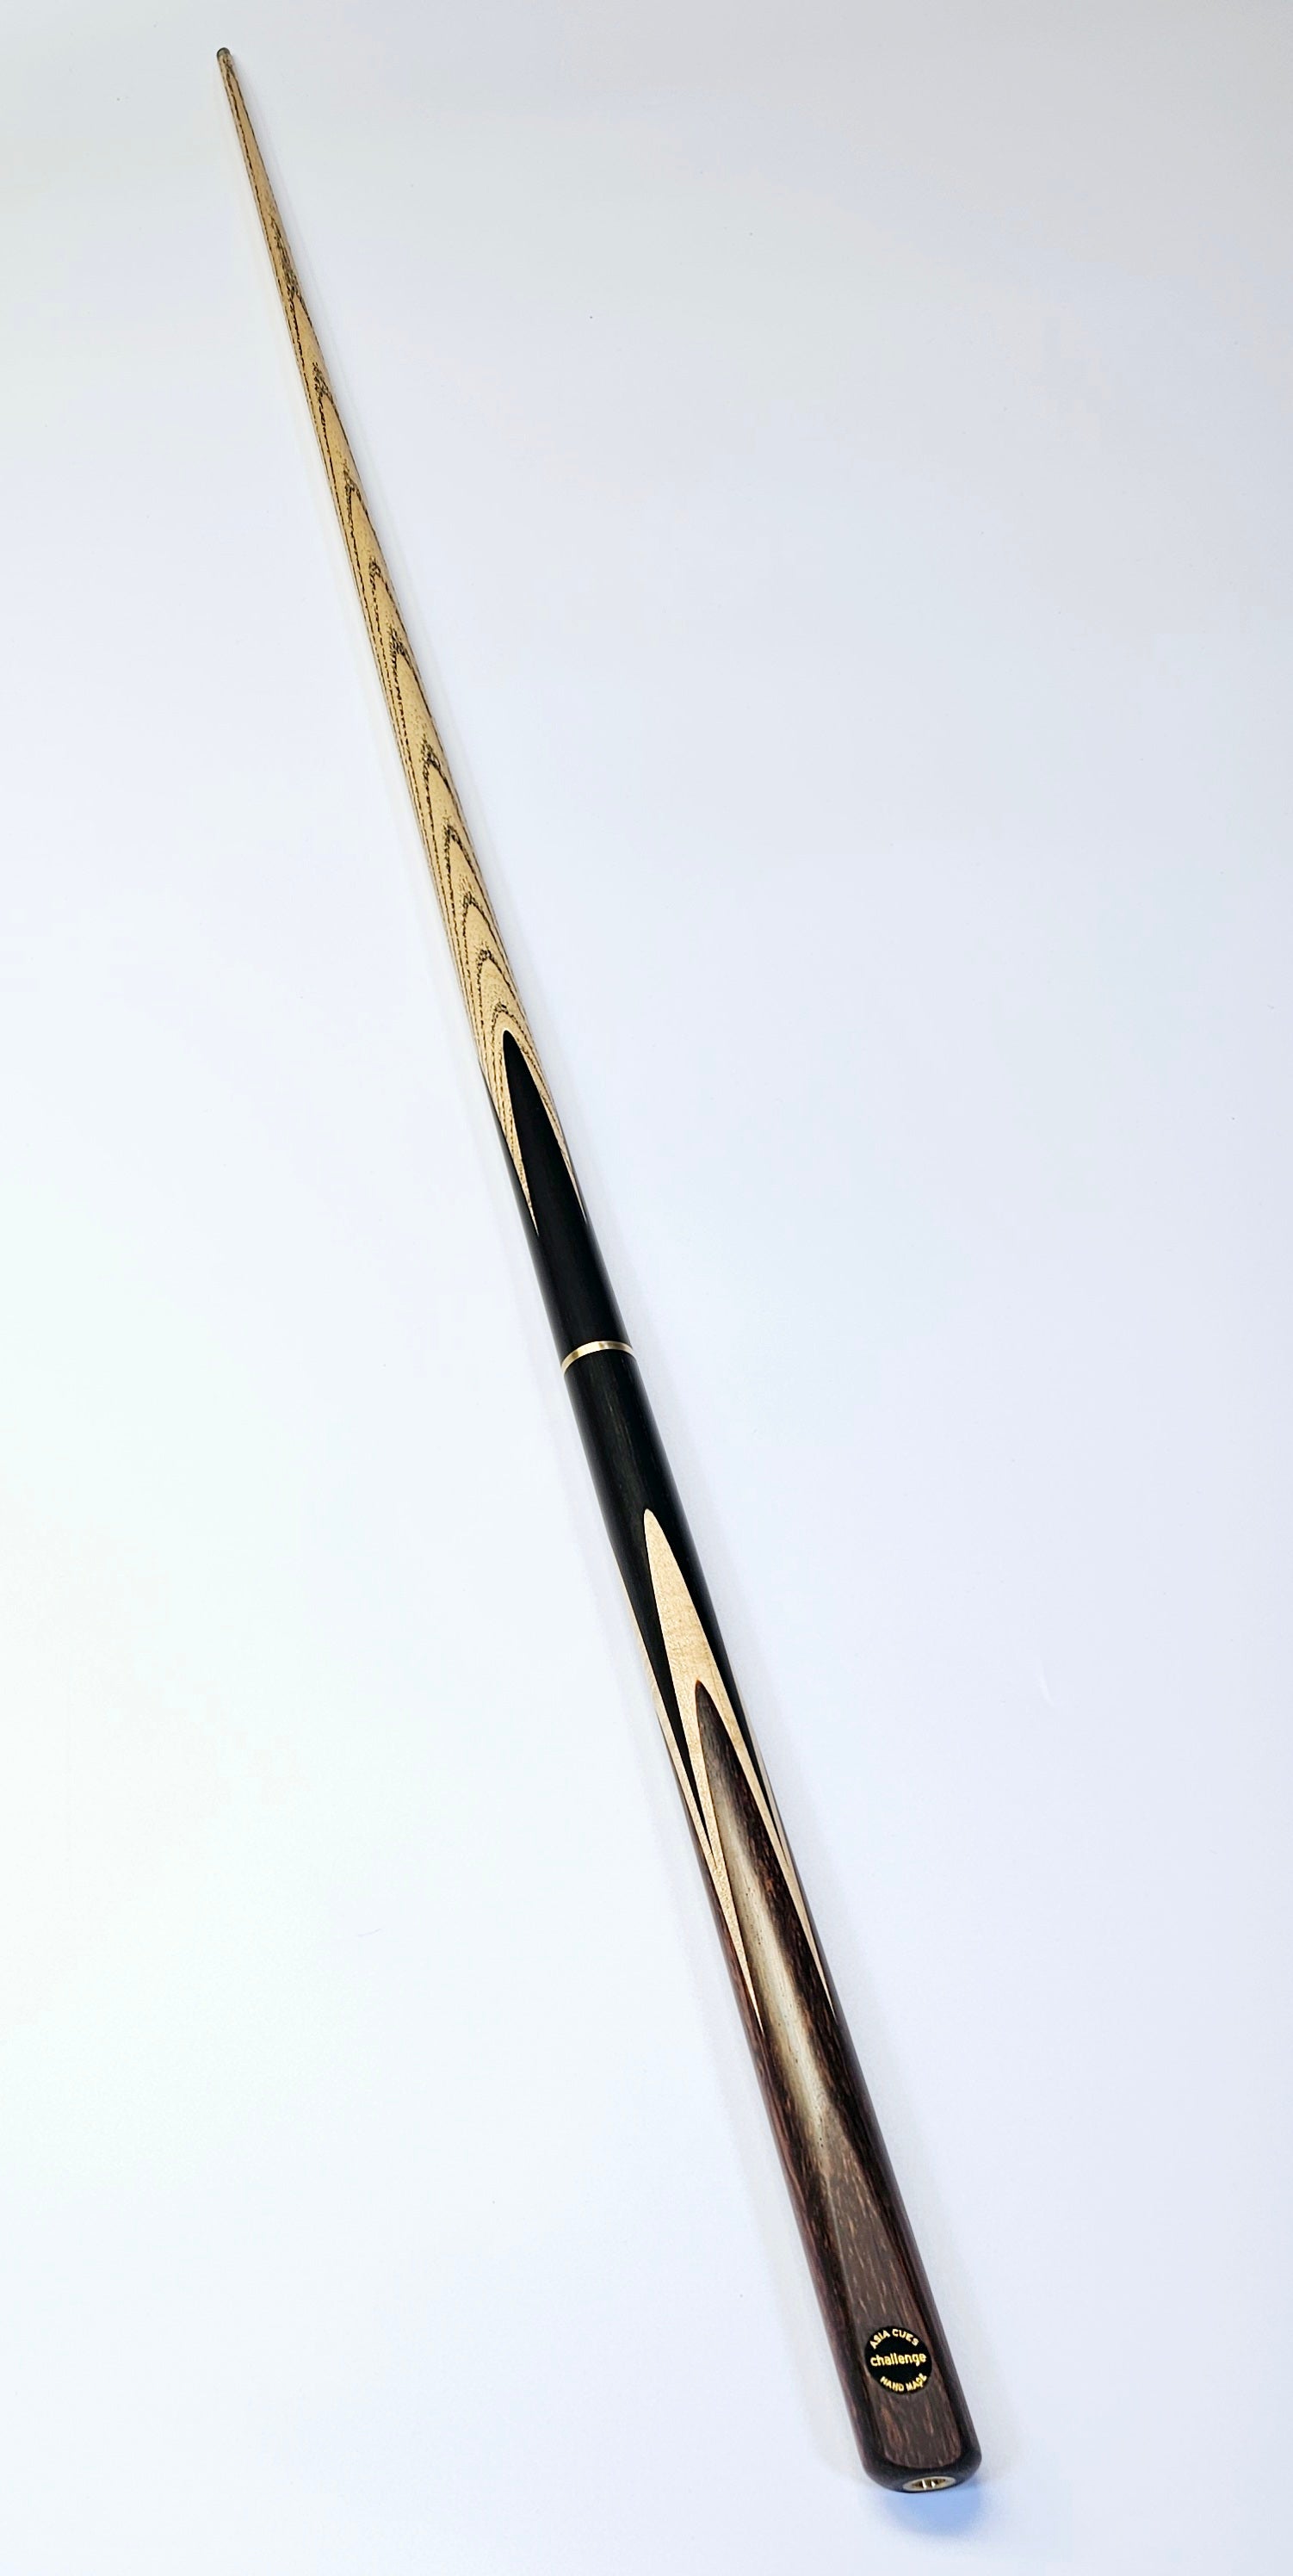 Asia Cues Challenge - 3/4 Jointed Snooker Cue 9.5mm Tip, 17.7oz, 58"